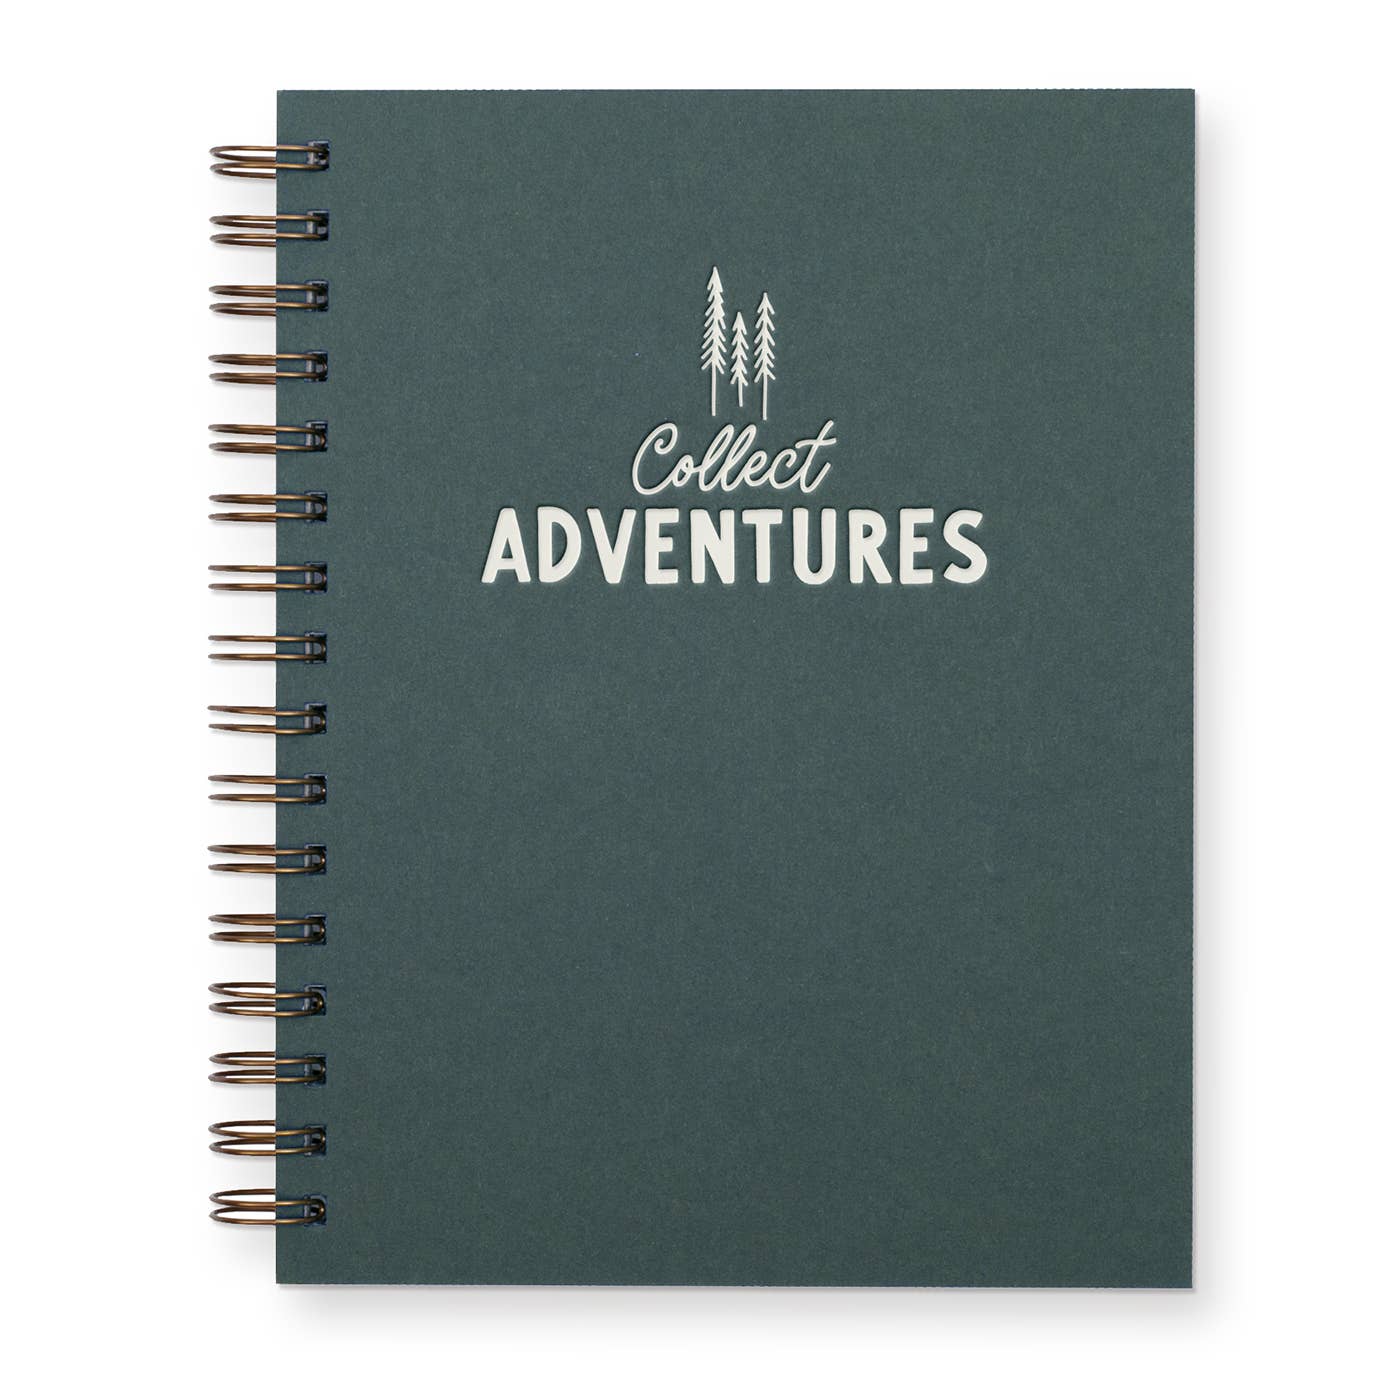 Ruff House Print Shop - Collect Adventures Journal